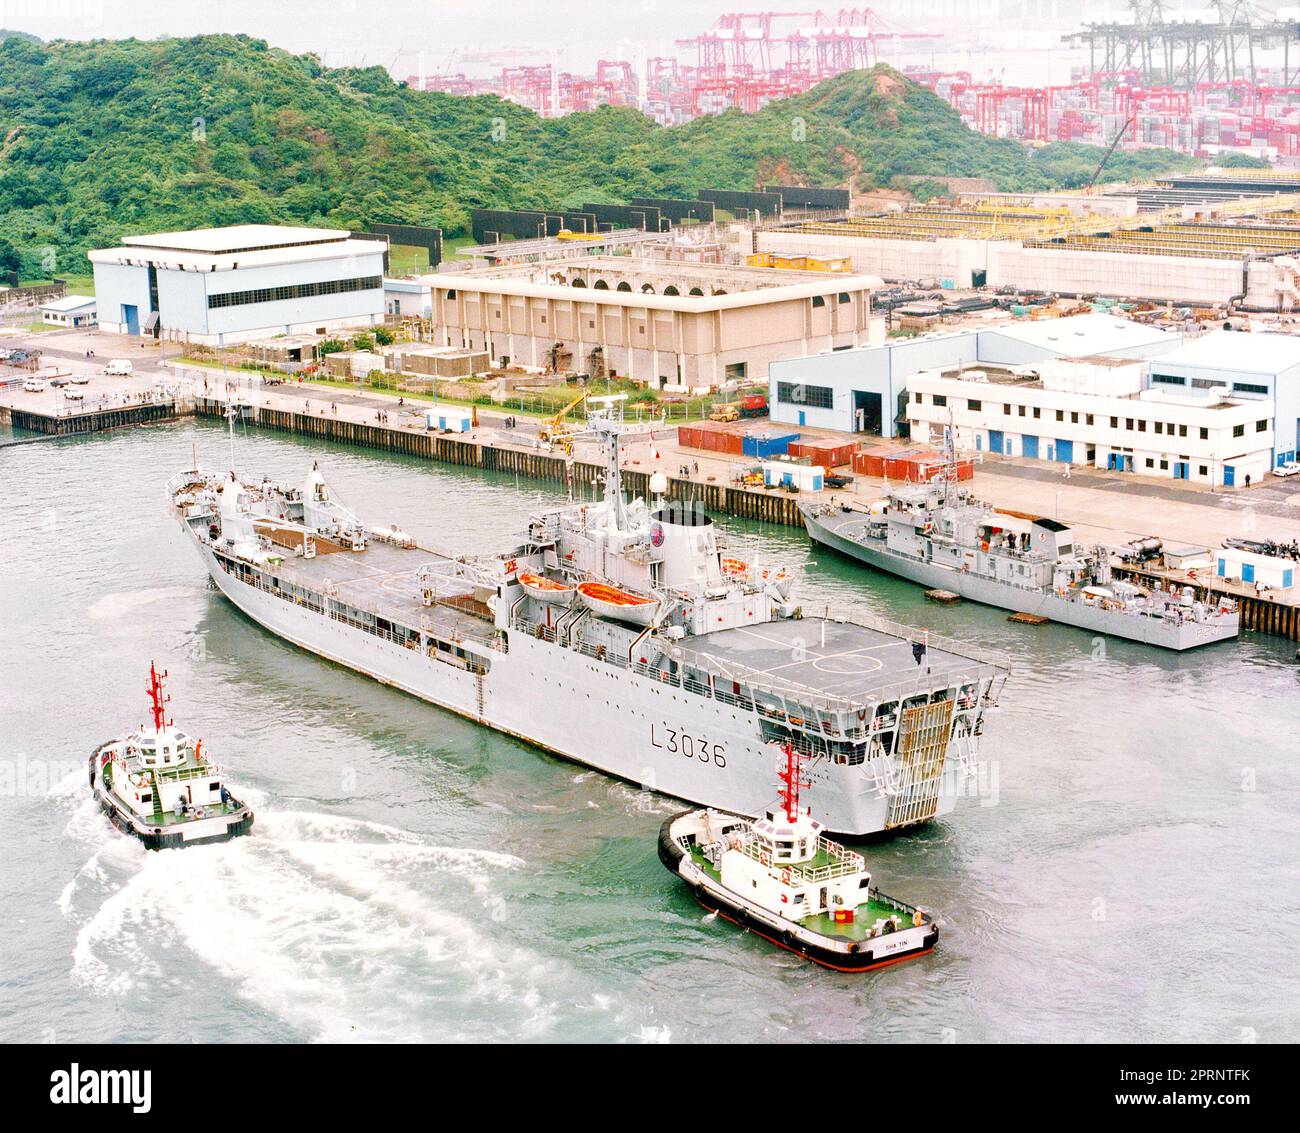 Royal Fleet Auxiliary ship RFA Sir Percivale arrives in Hong Kong in June 1997 to assist with the British withdrawal from Hong Kong. Stock Photo